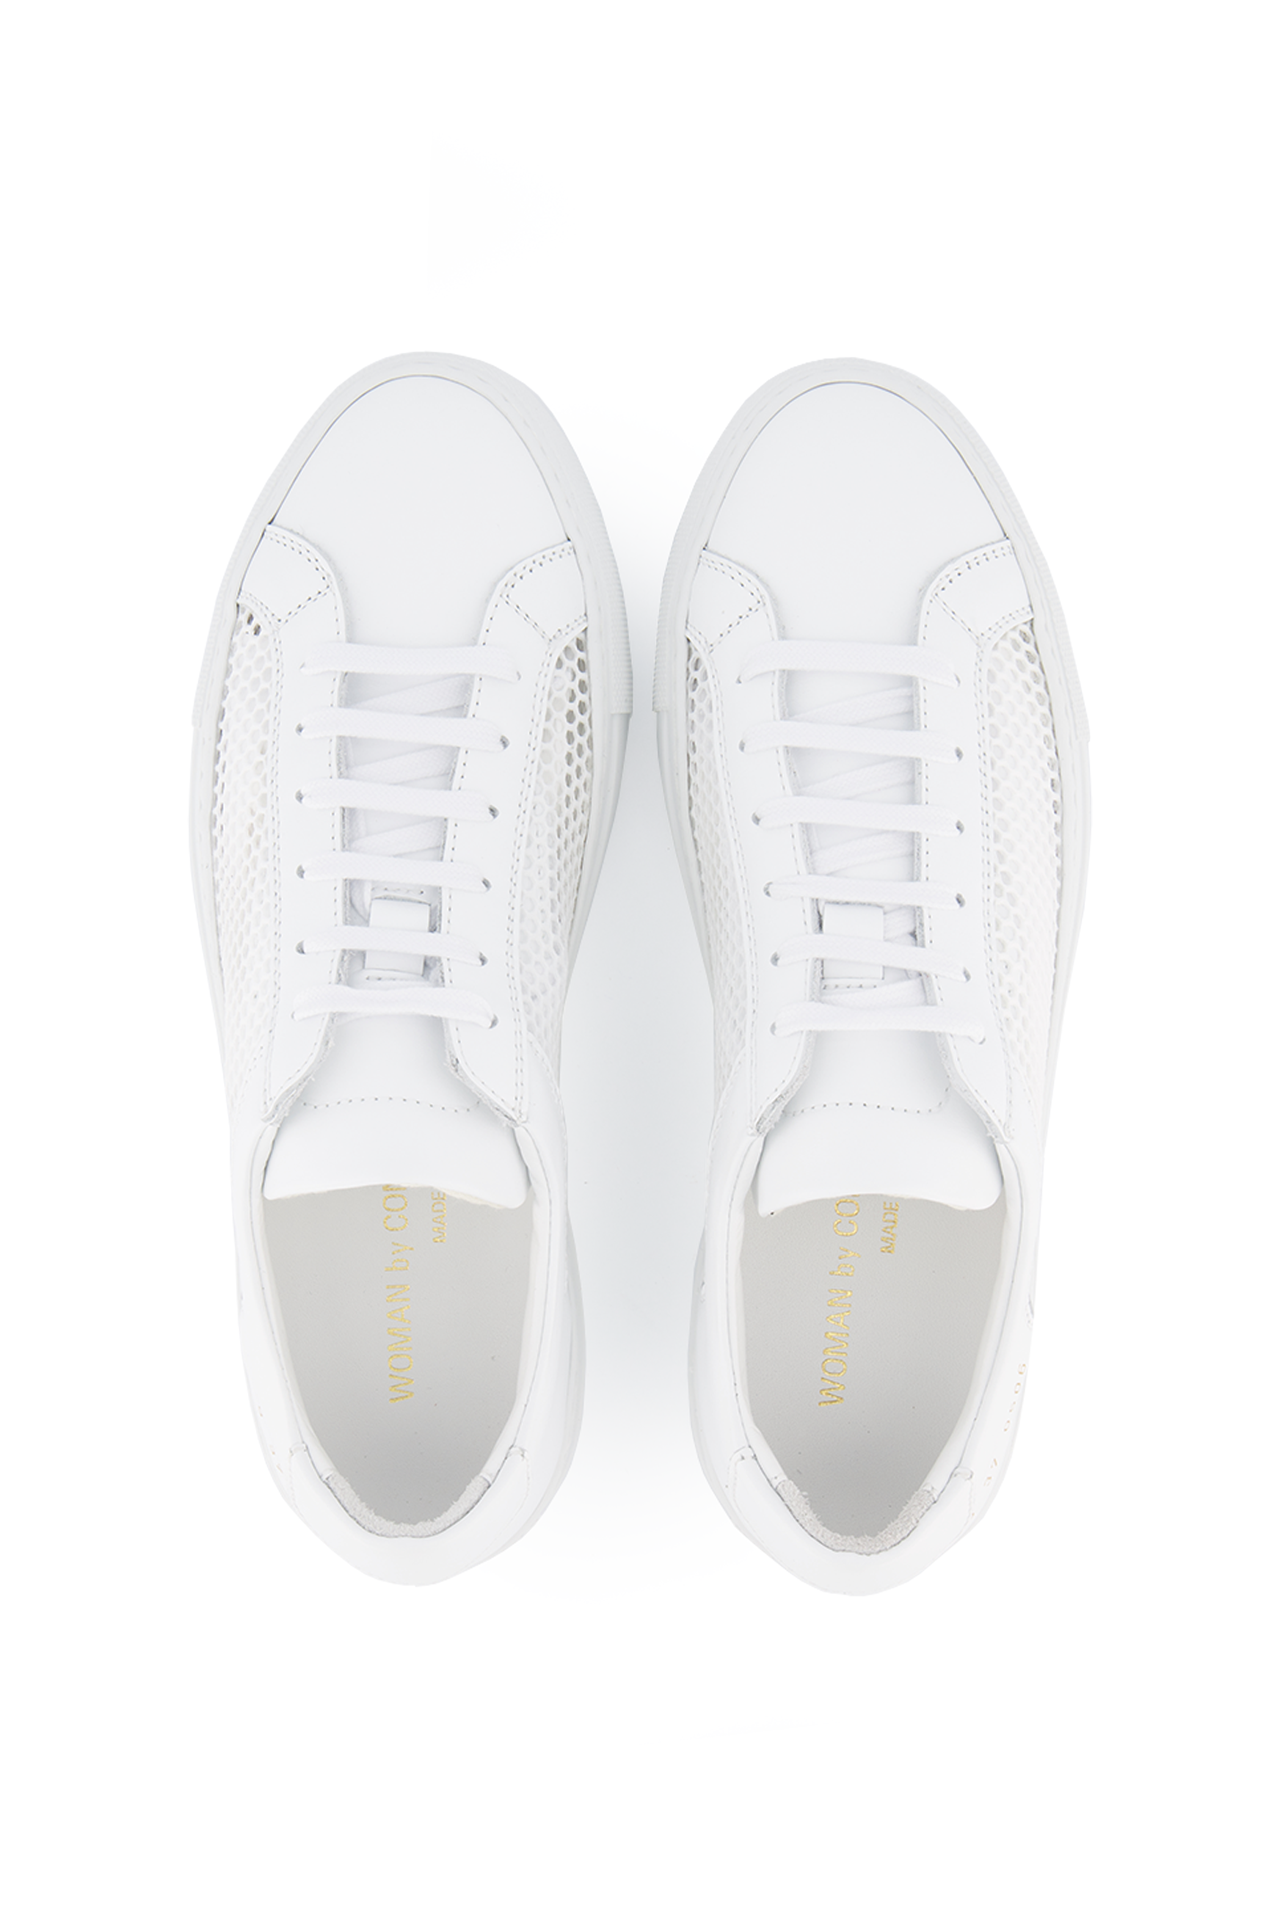 common projects achilles low summer edition